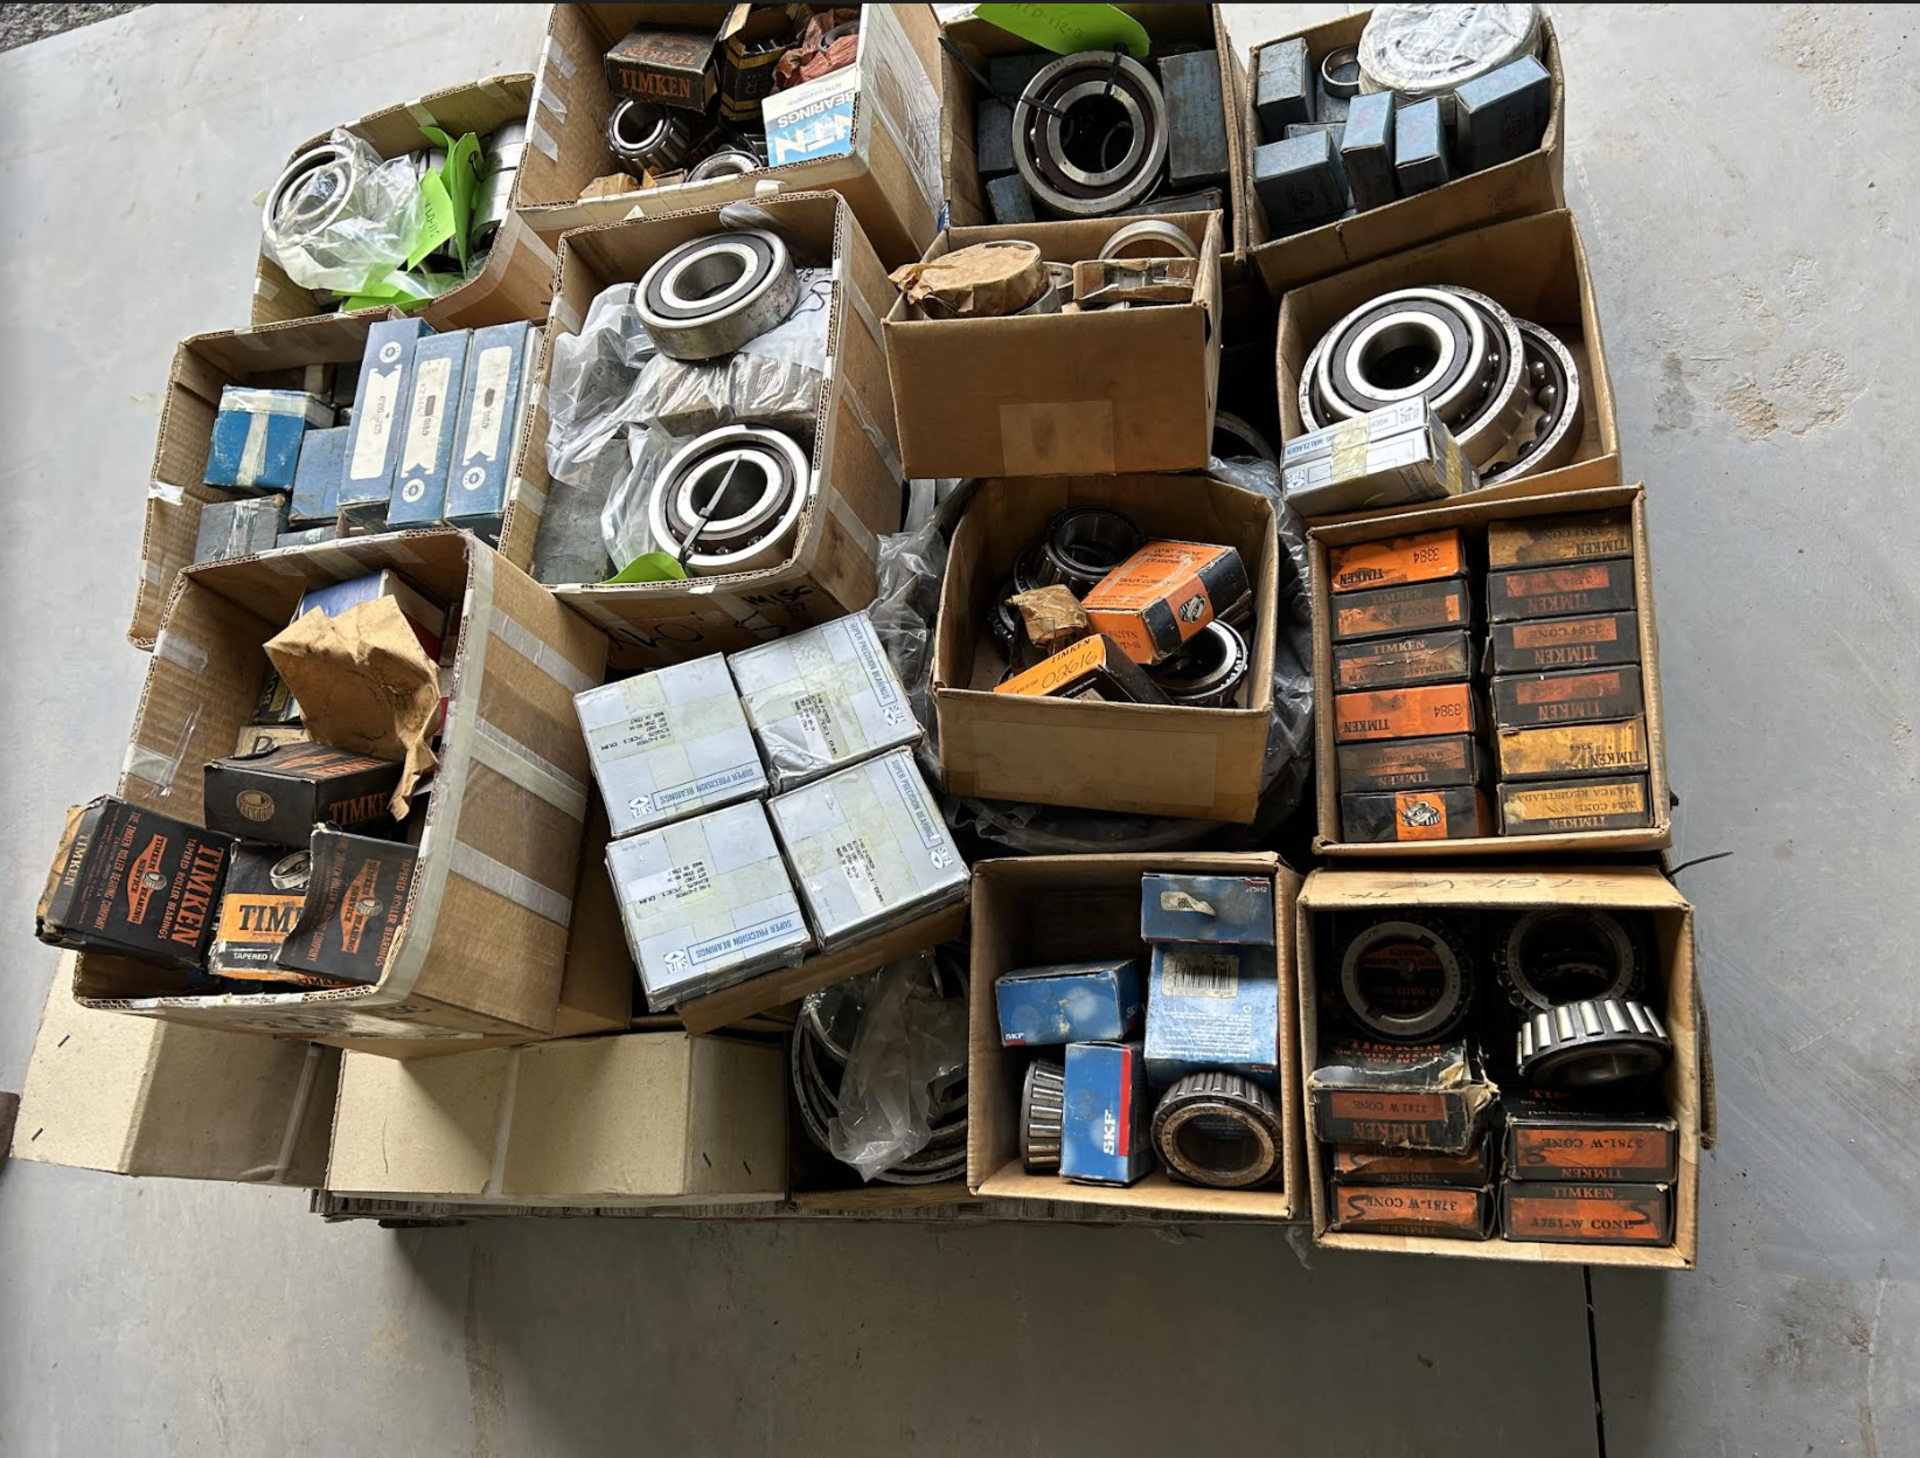 (Located in Rochester, NY) Pallet of Miscellaneous Bearings, Timken, SNFA, SKF, NTN